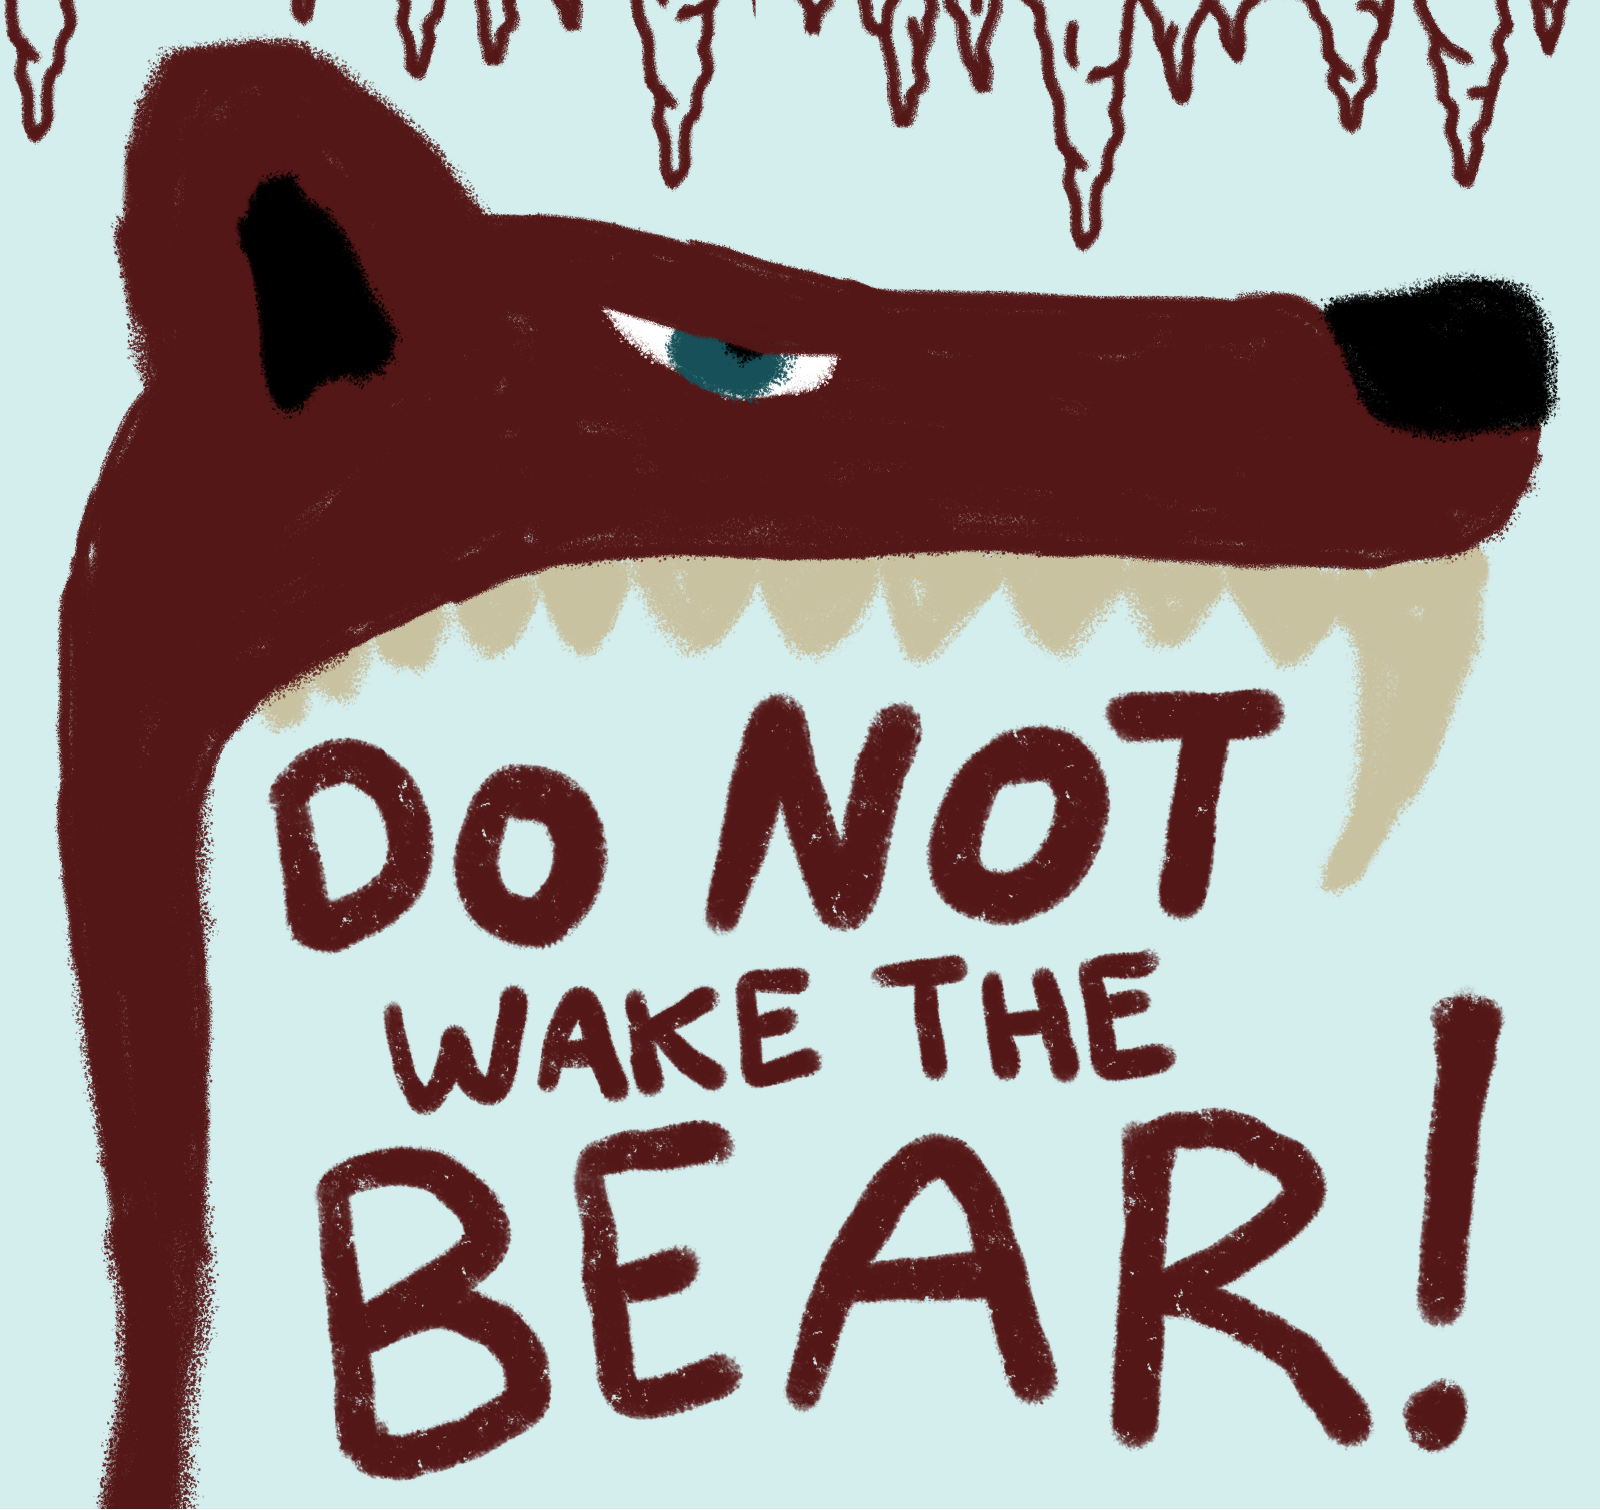 Thumbnail for the project Sleeping Bear